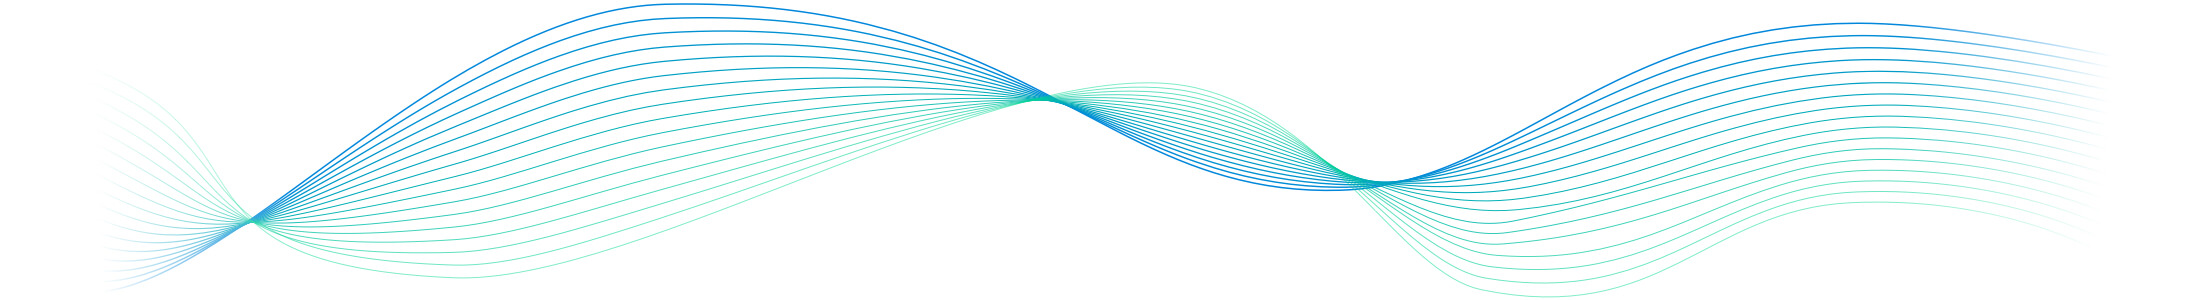 An image of a conceptual wave made from lines.